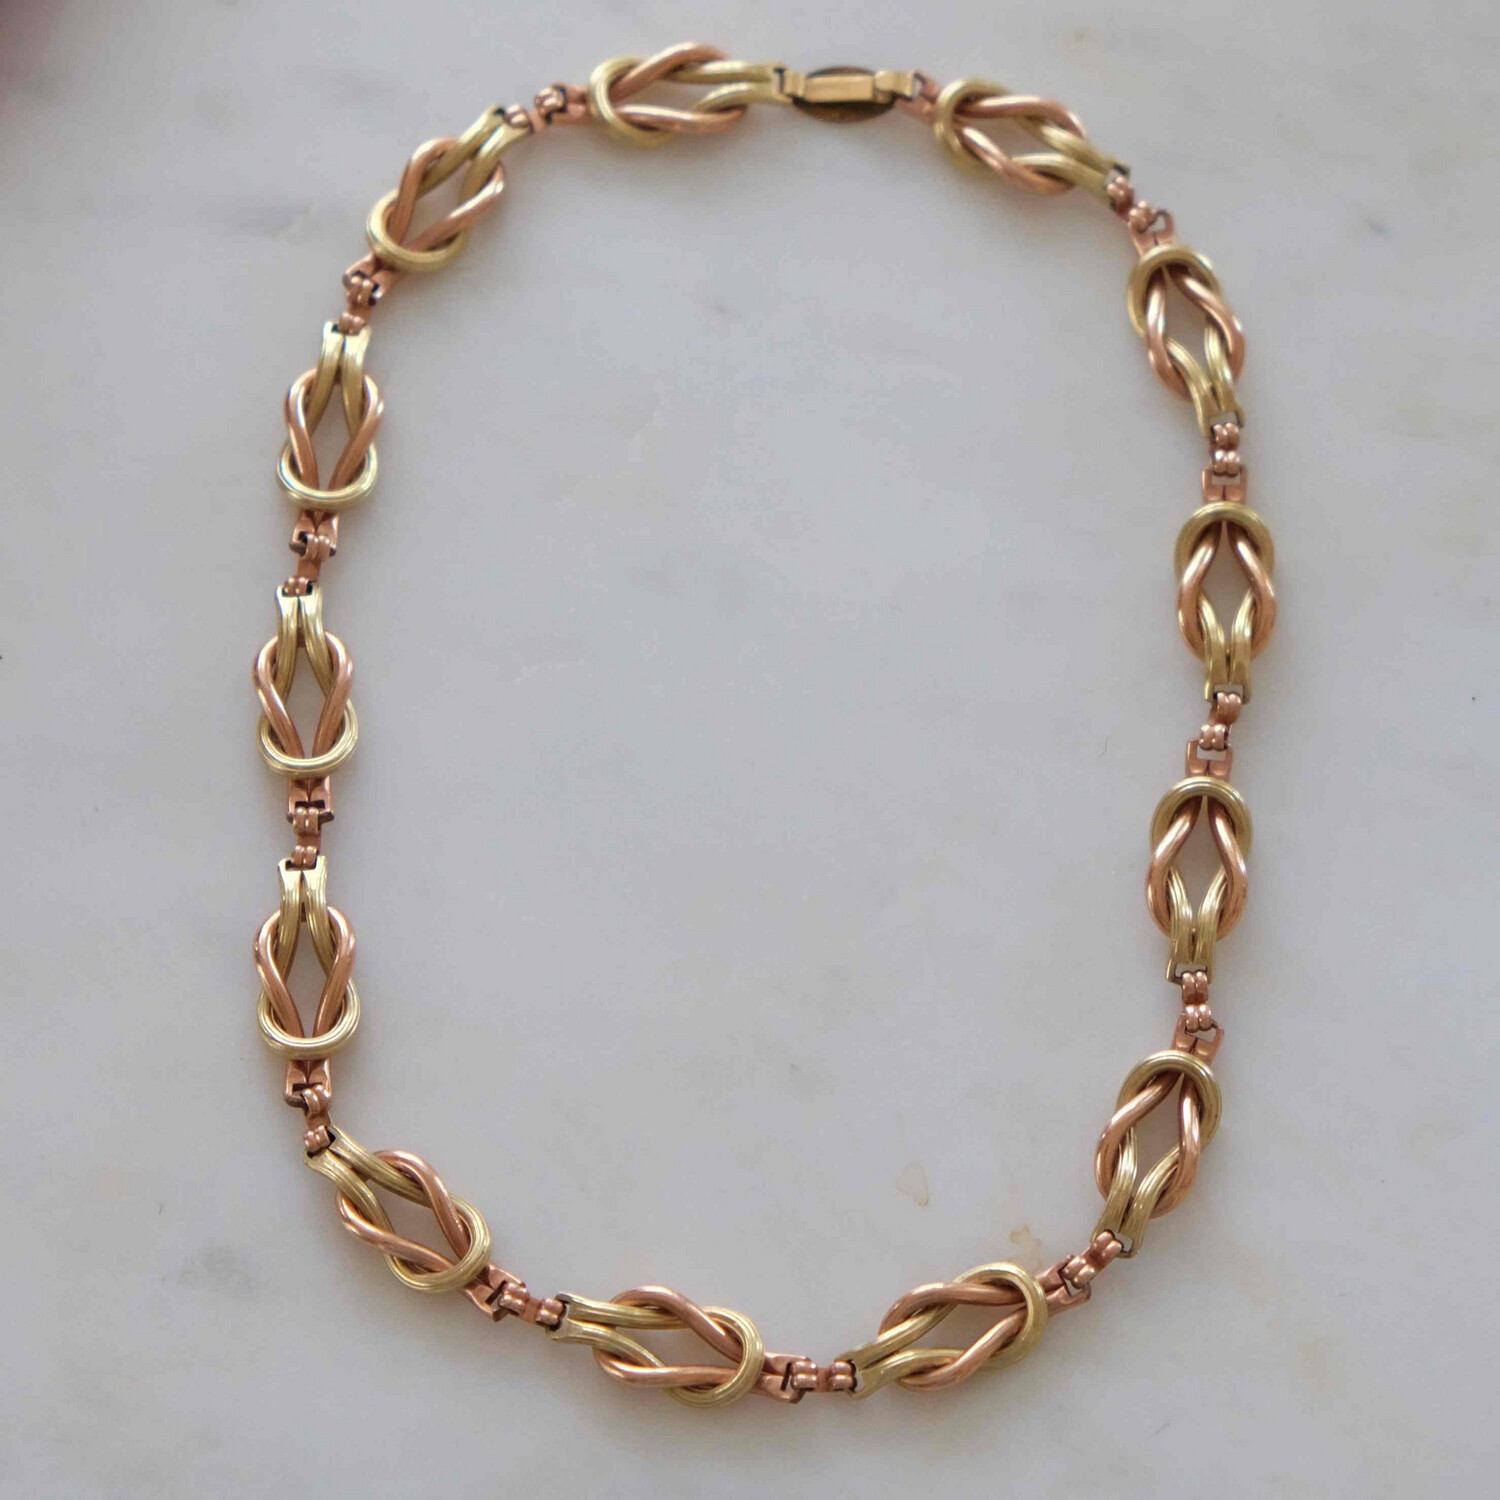 Antique Two Color 12k Gold Filled Chain